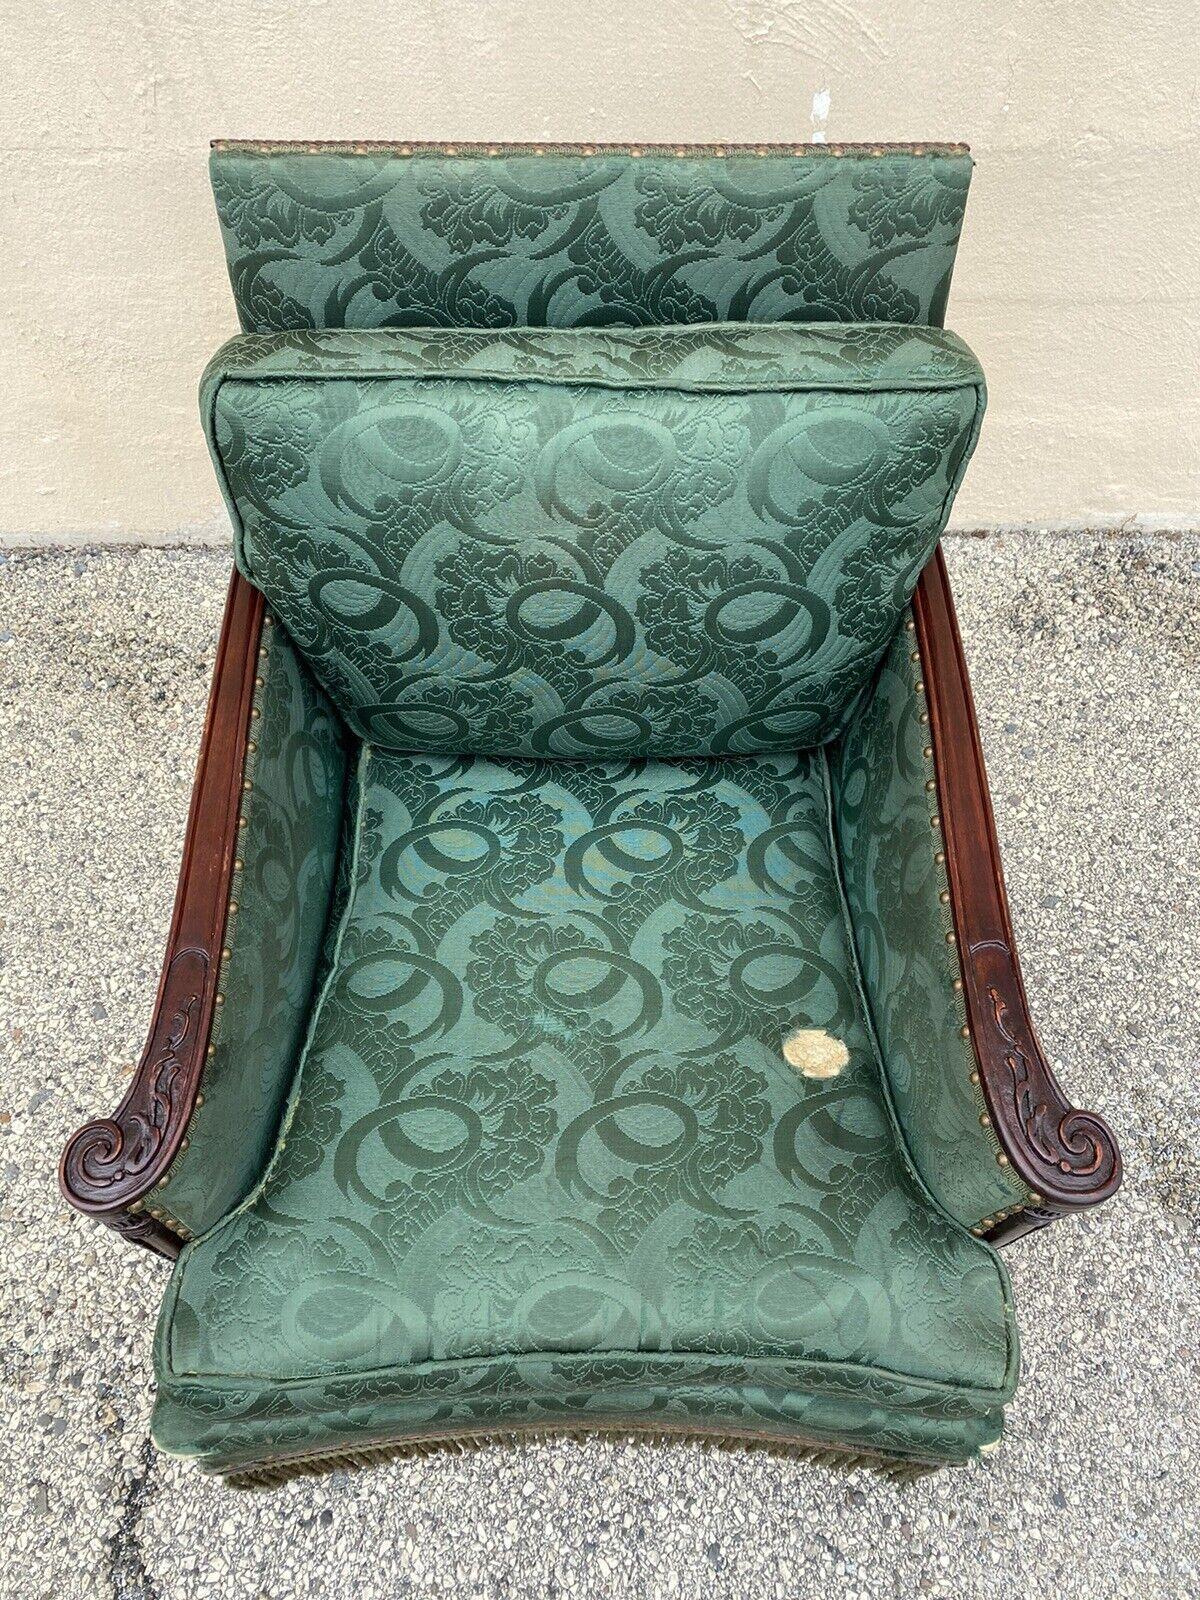 Antique French Hollywood Regency Carved Mahogany Art Deco Club Lounge Chair In Good Condition For Sale In Philadelphia, PA